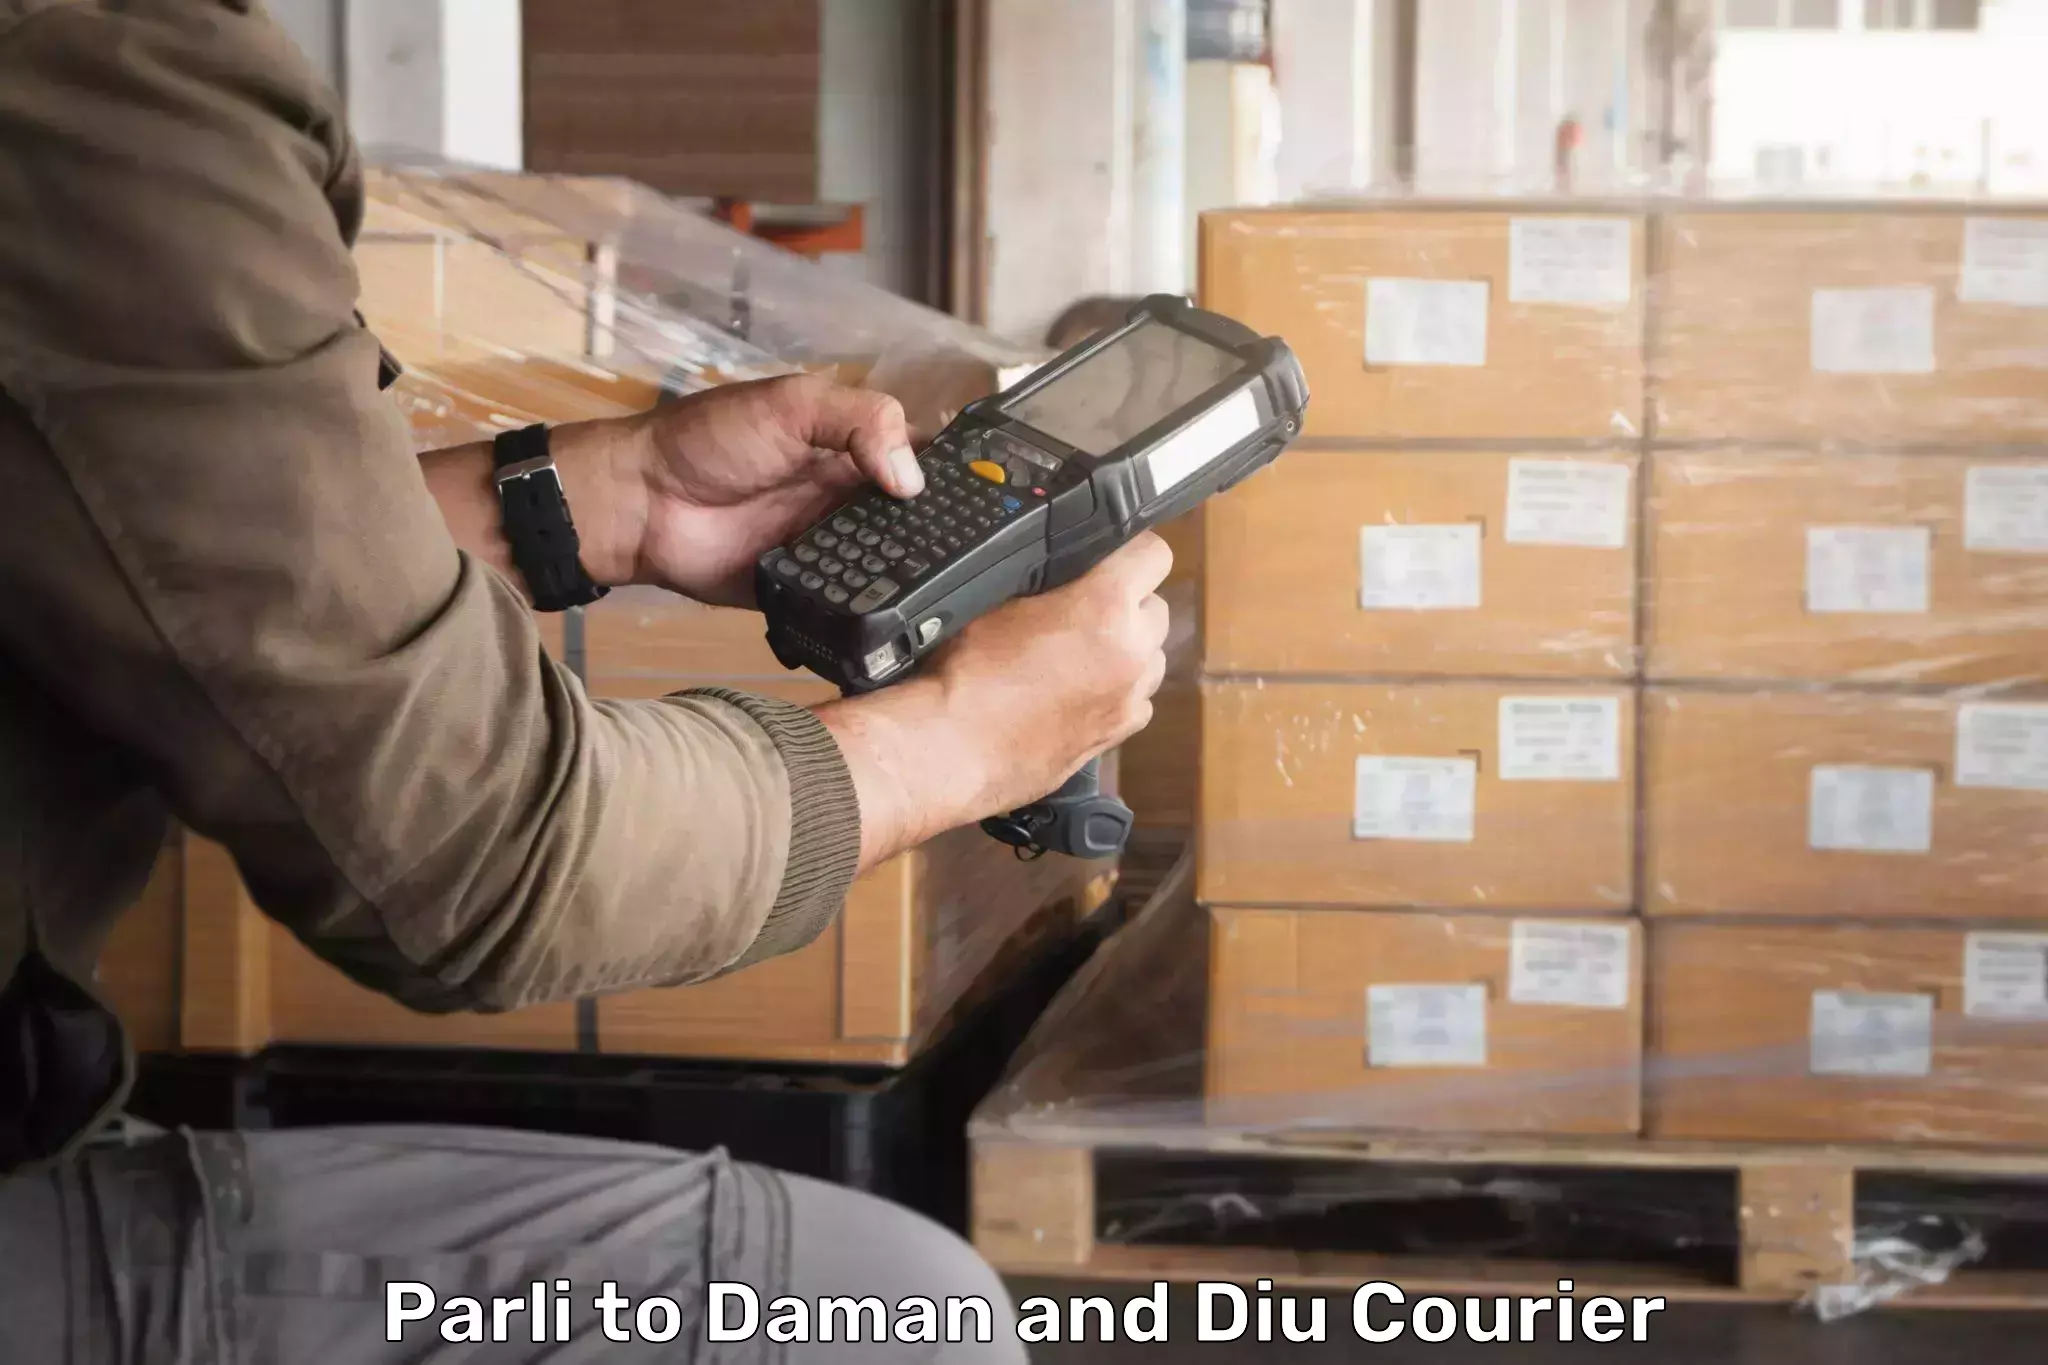 Multi-service courier options Parli to Daman and Diu